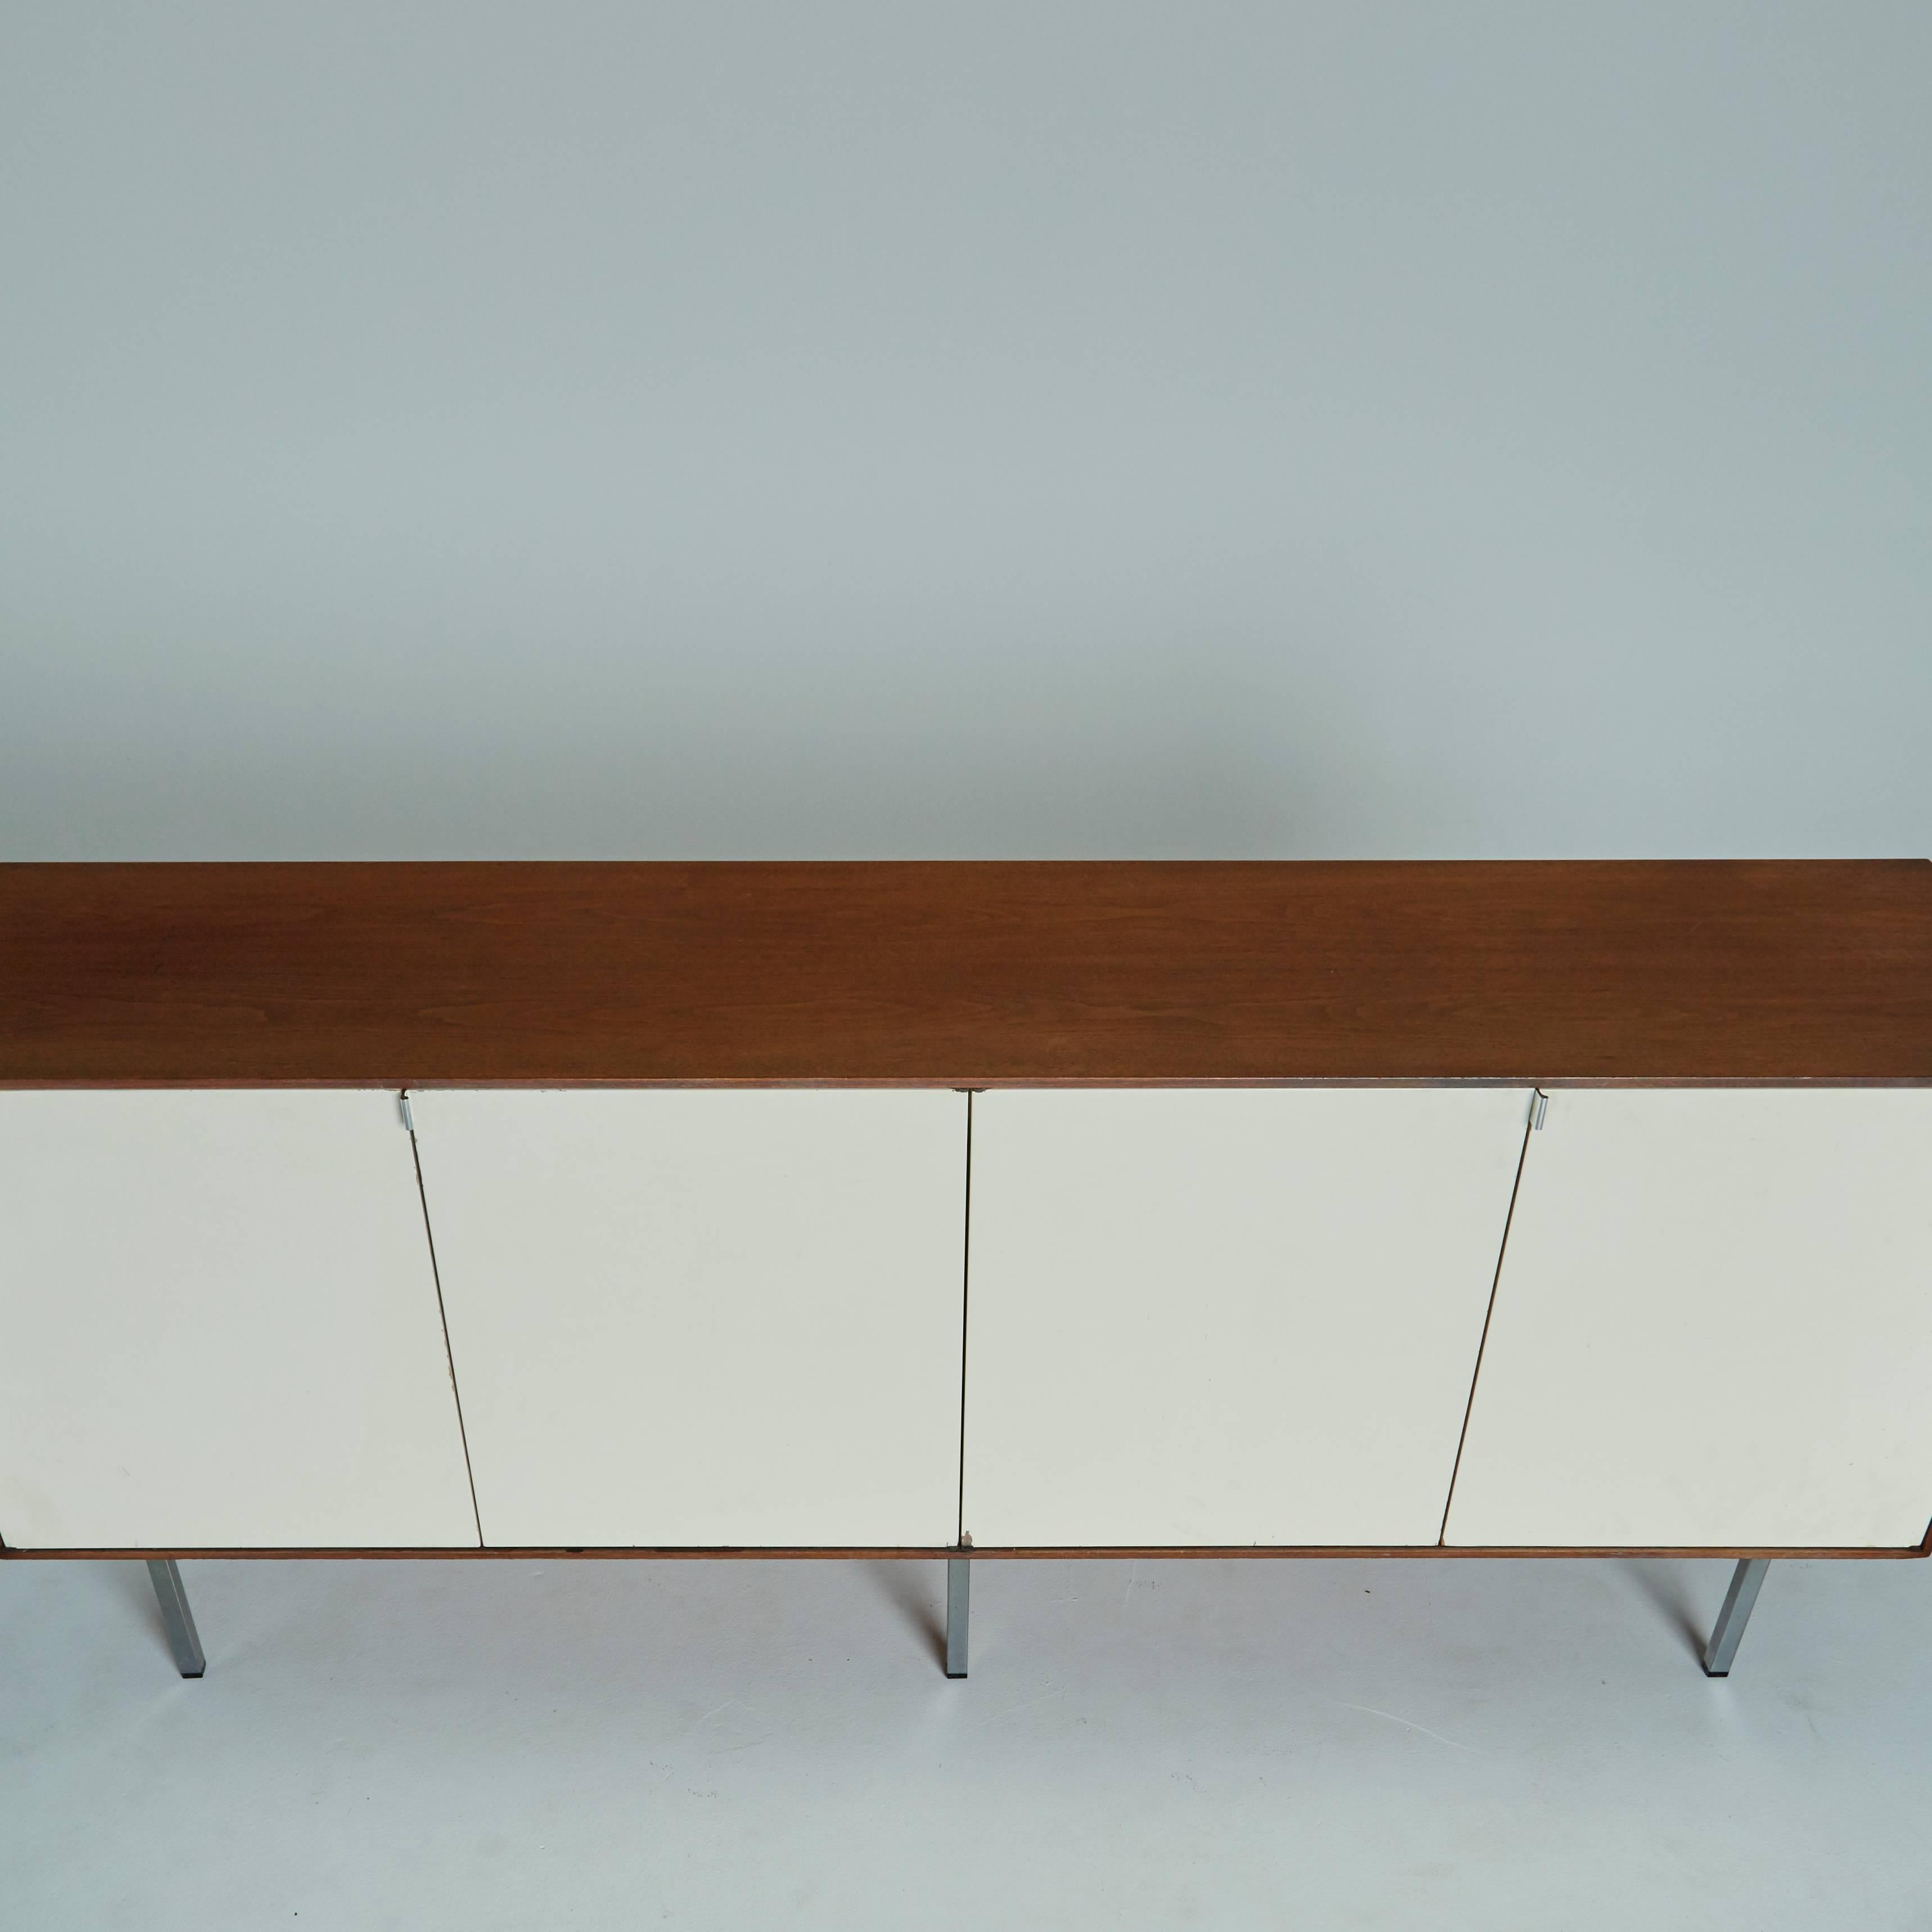 Created by Florence Knoll, circa 1950s, this storage cabinet is exemplary of her Minimalist and utilitarian design values. The walnut body of this credenza is enclosed by four white lacquered steel cabinet doors. The birch interior features open